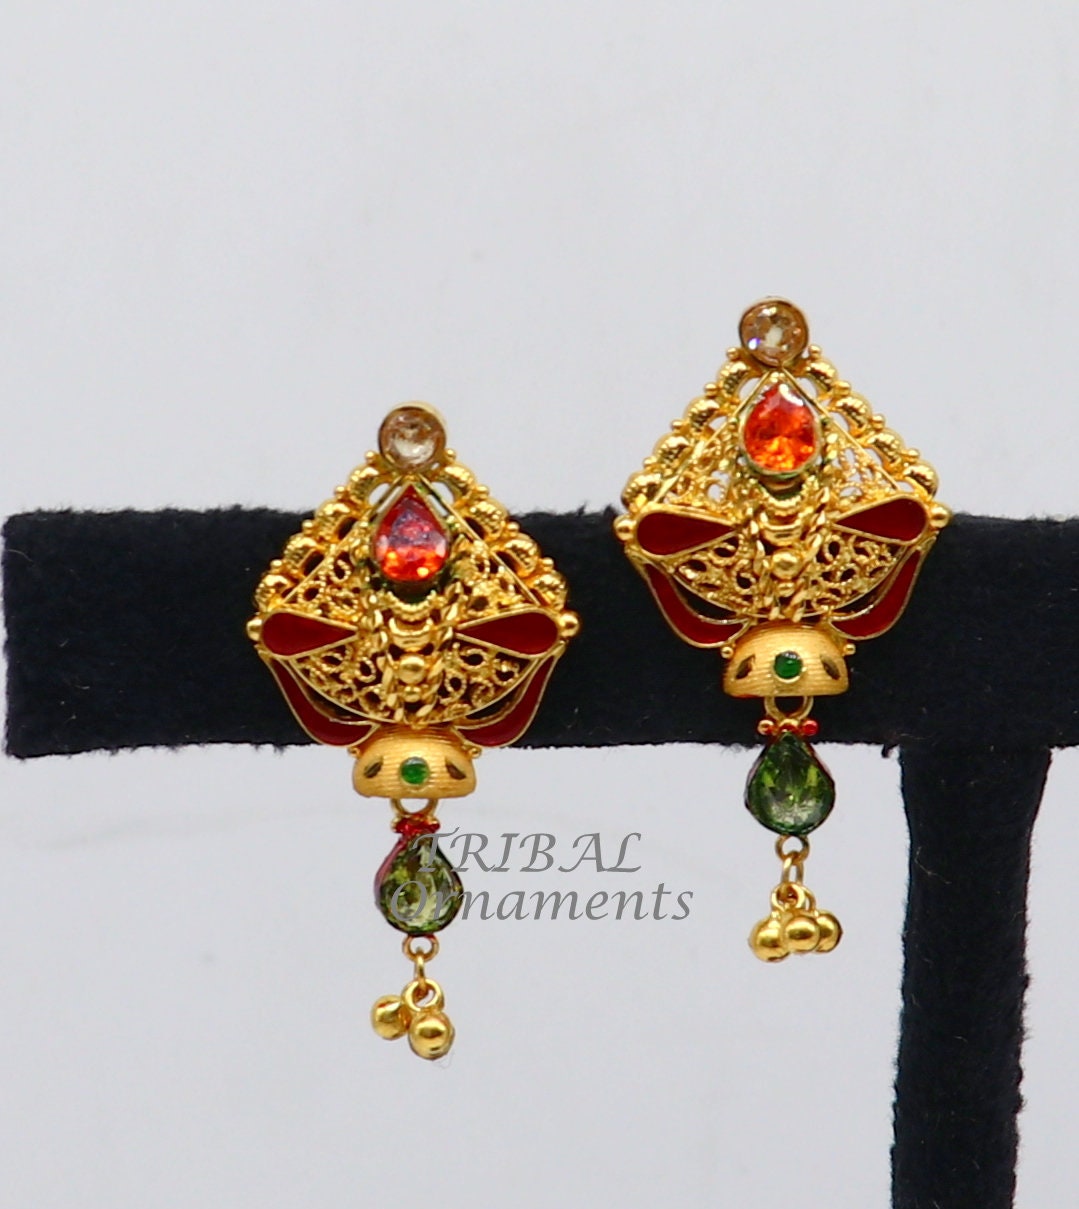 22kt or 22ct yellow gold handmade traditional cultural fashionable stud earring amazing filigree work ethnic jewelry er167 - TRIBAL ORNAMENTS